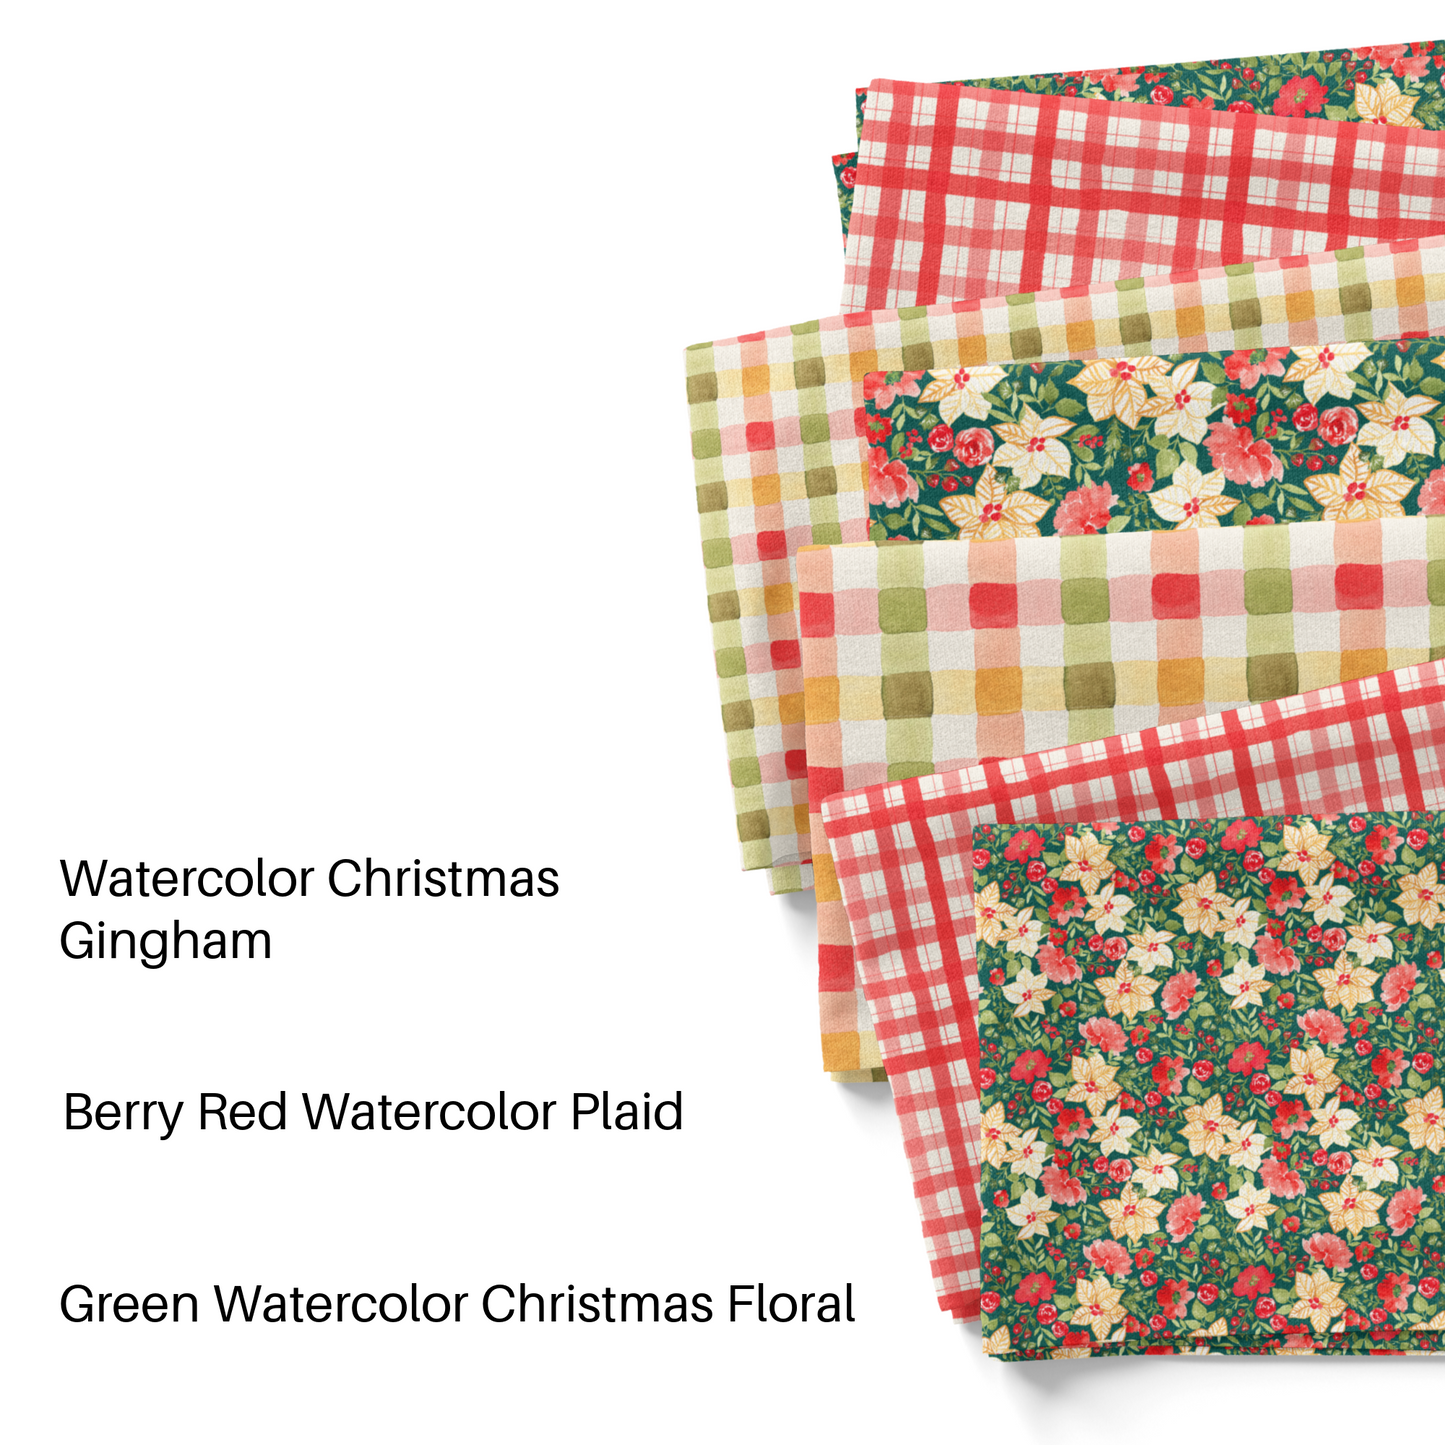 Berry Red Watercolor Plaid Fabric By The Yard